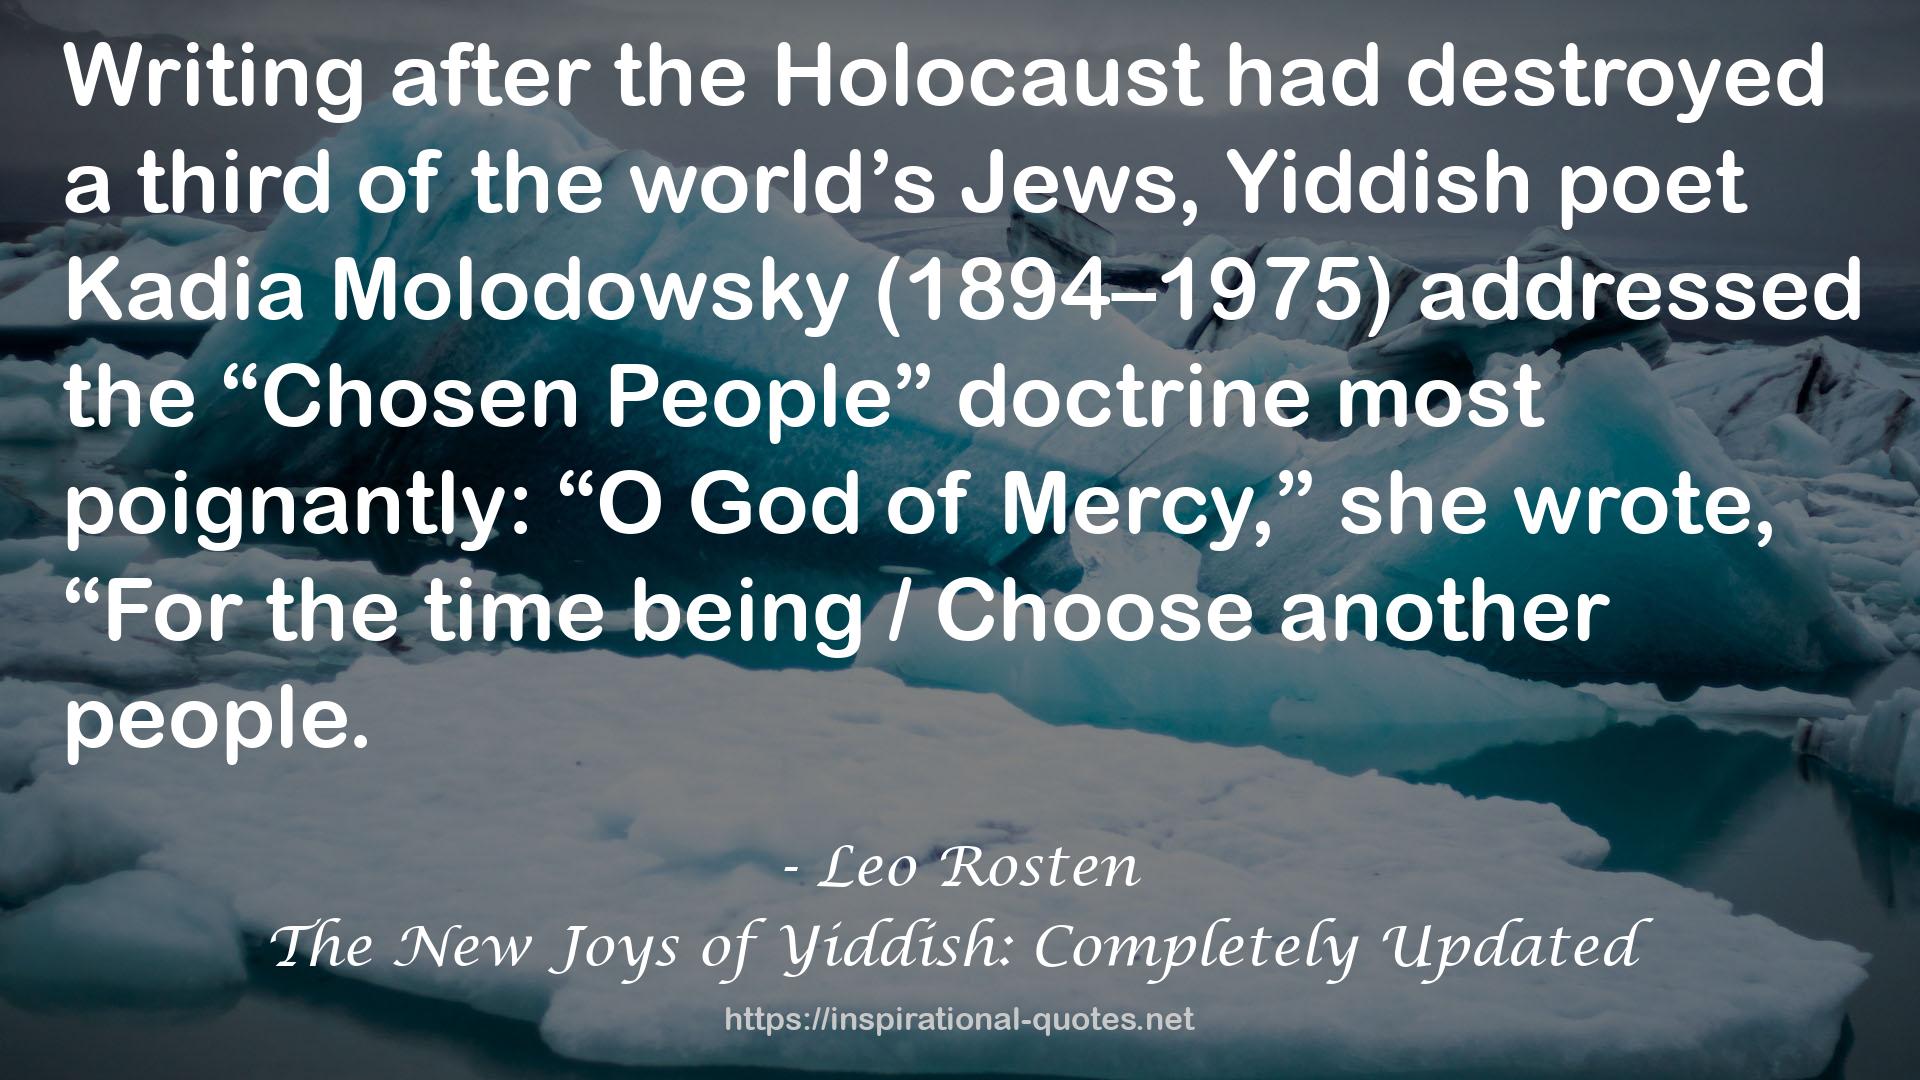 The New Joys of Yiddish: Completely Updated QUOTES